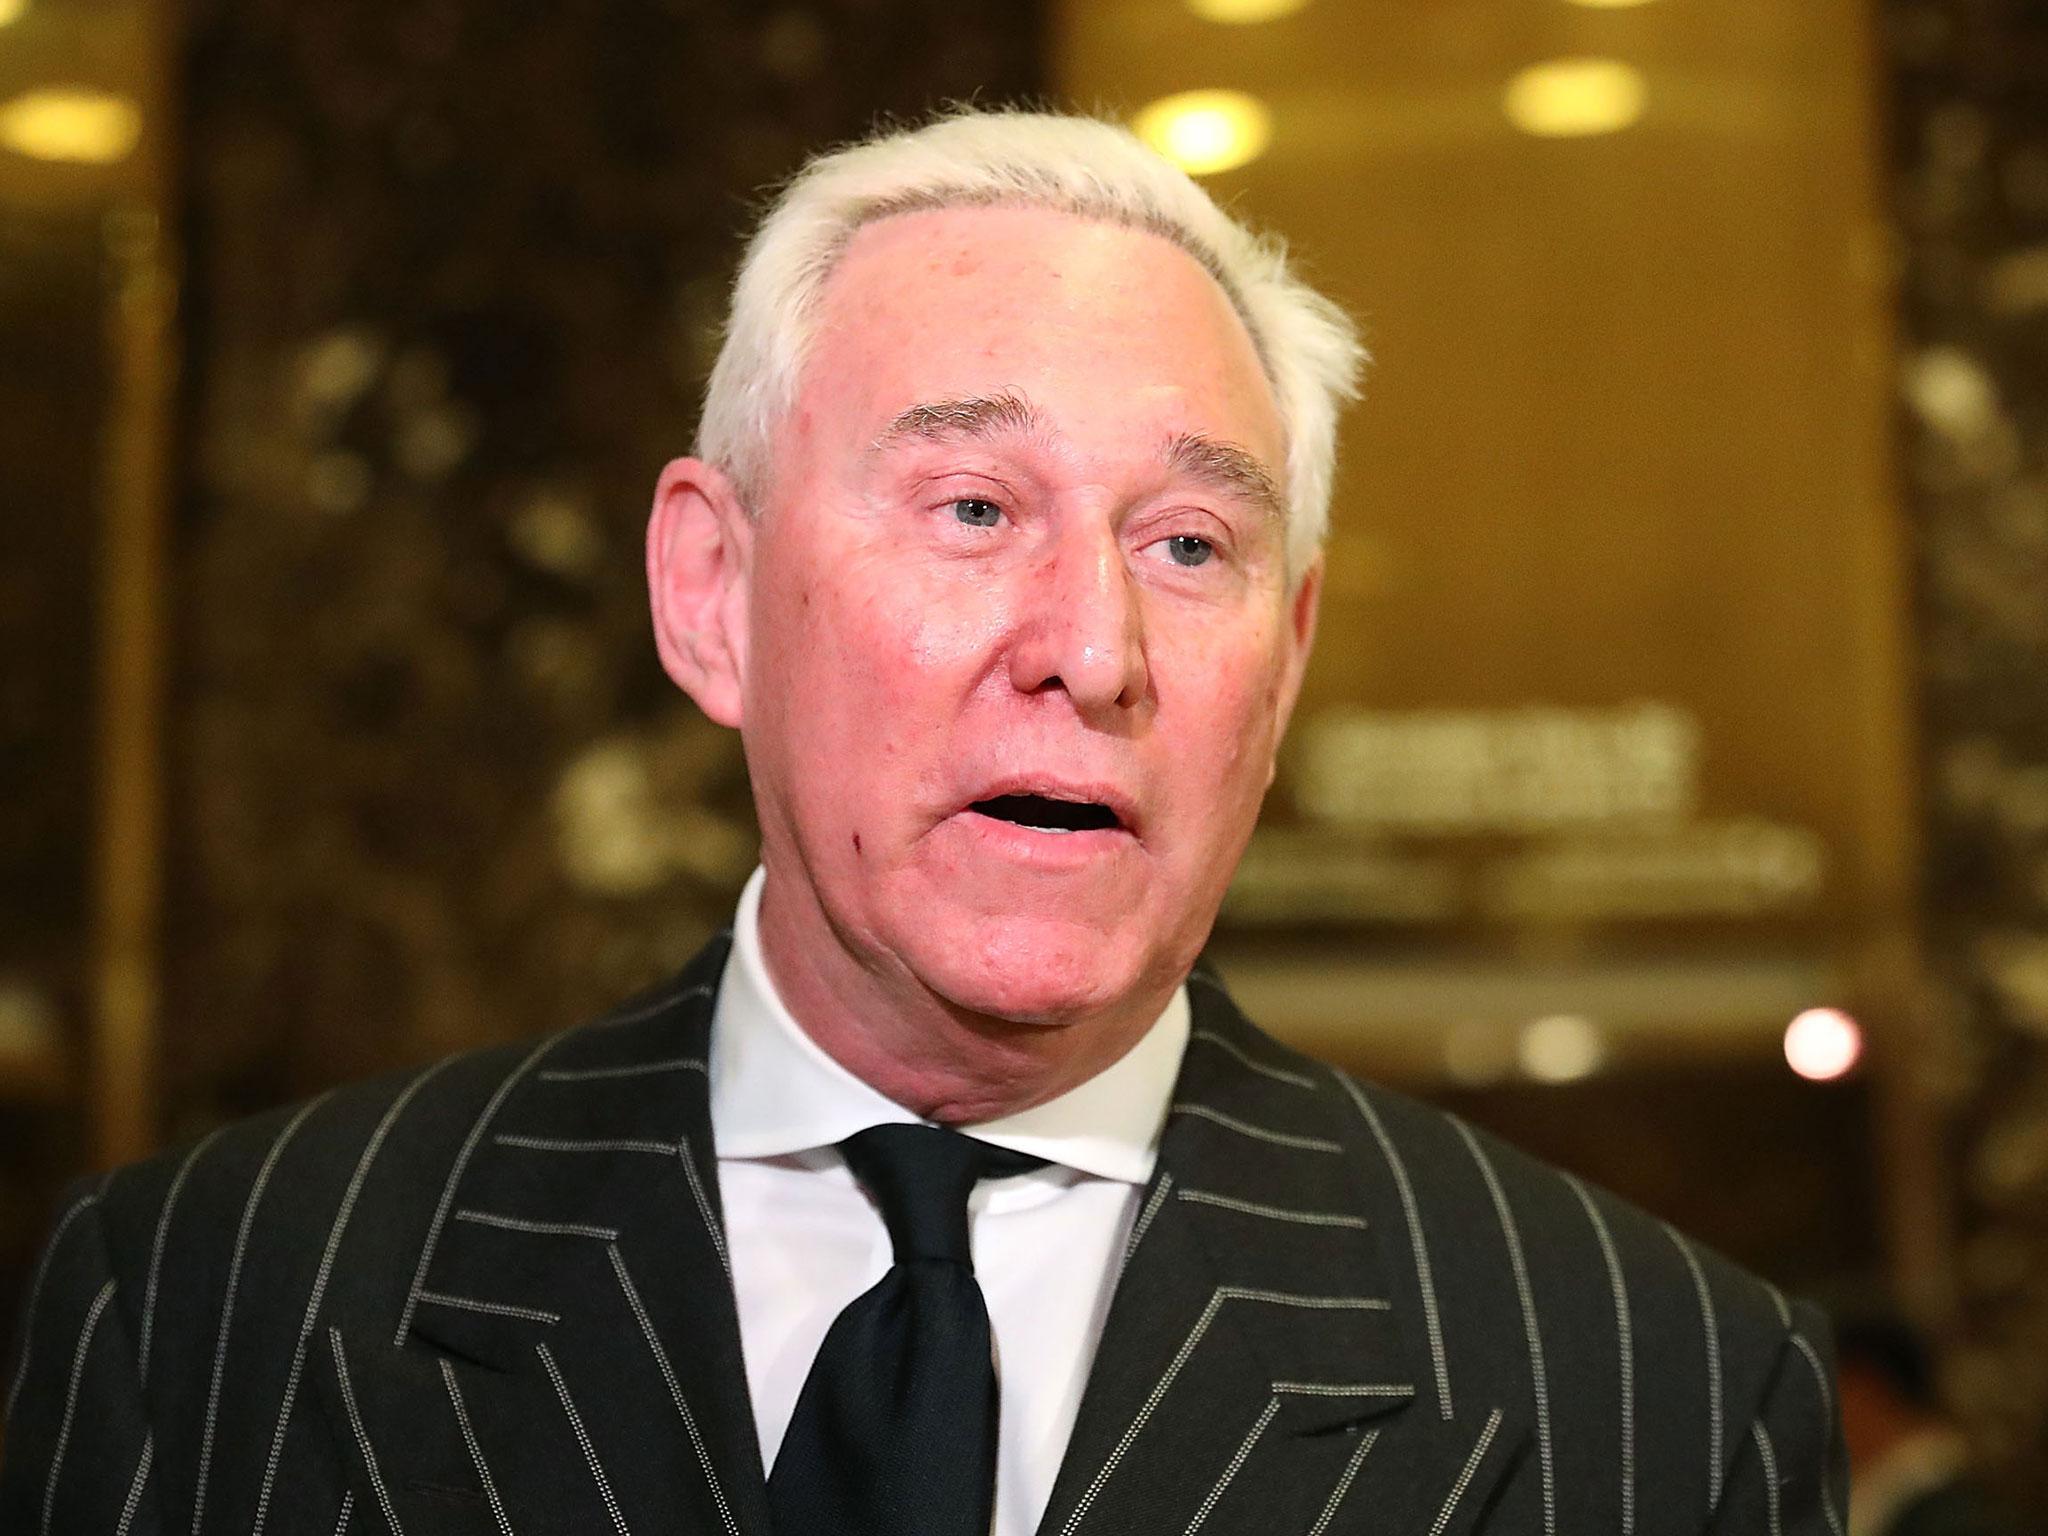 Roger Stone advised Donald Trump during his presidential campaign and reportedly remains 'a confidant to Trump'